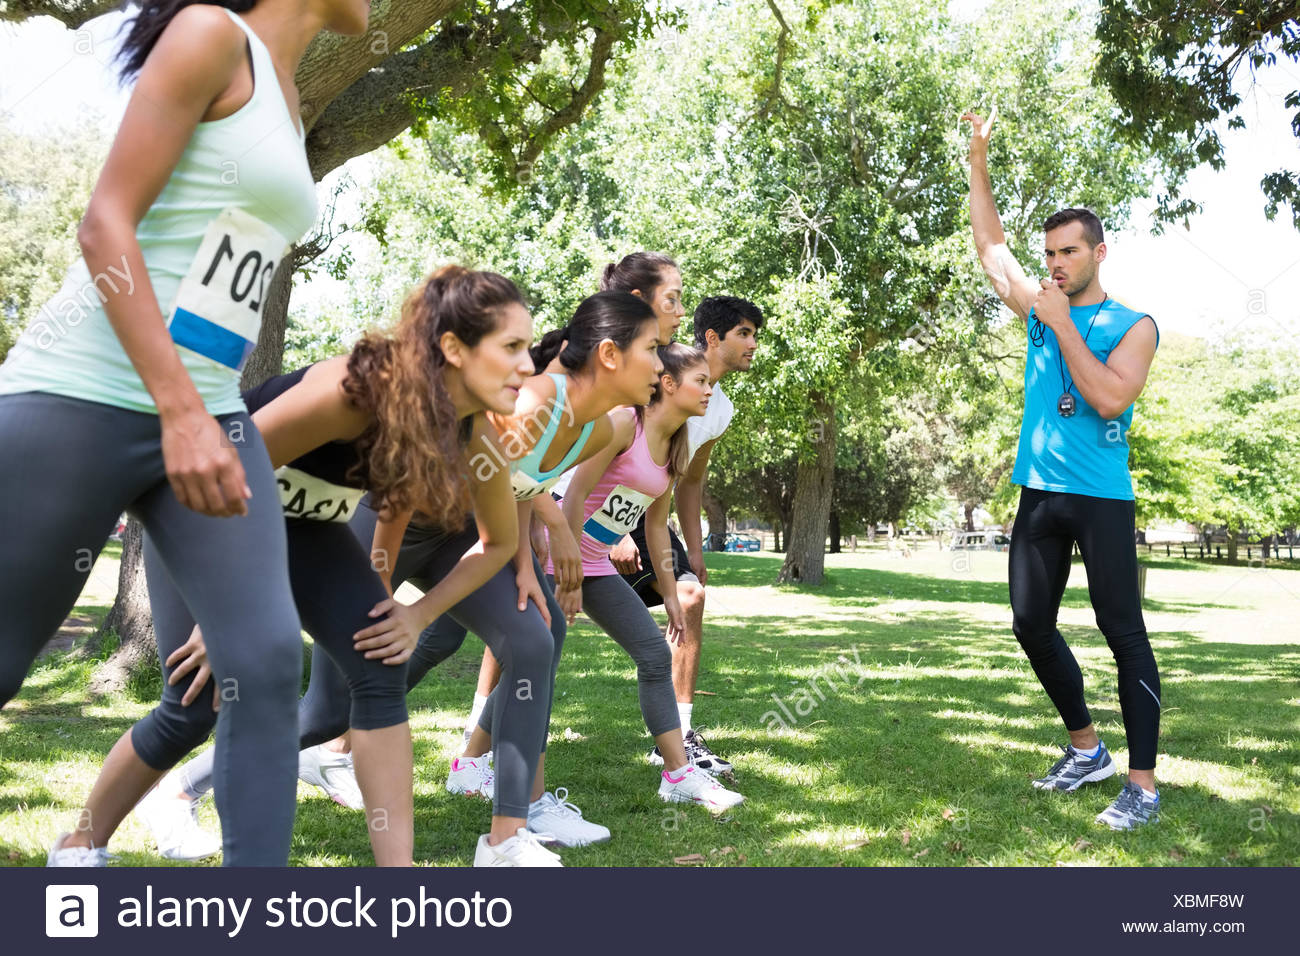 Whistling Man Stock Photos & Whistling Man Stock Images - Alamy